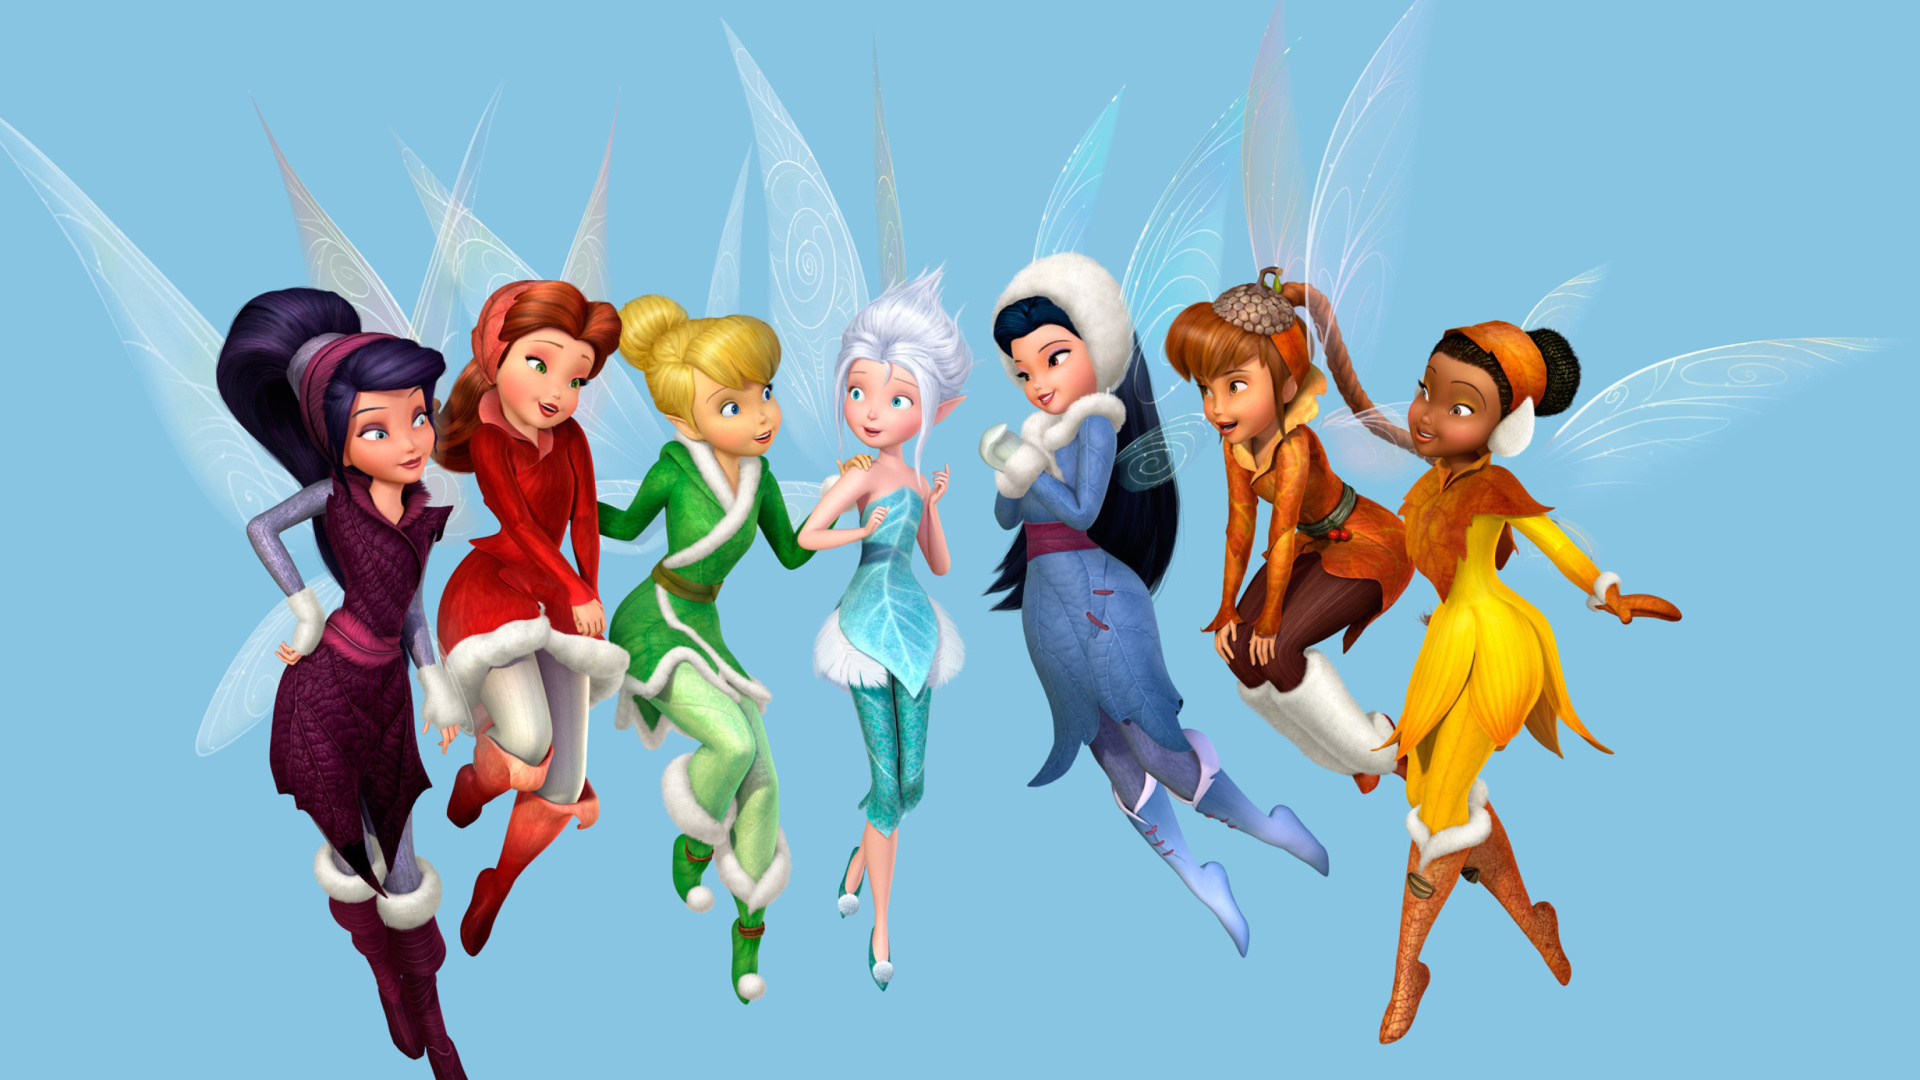 Das Tinkerbell and the Mysterious Winter Woods Wallpaper 1920x1080